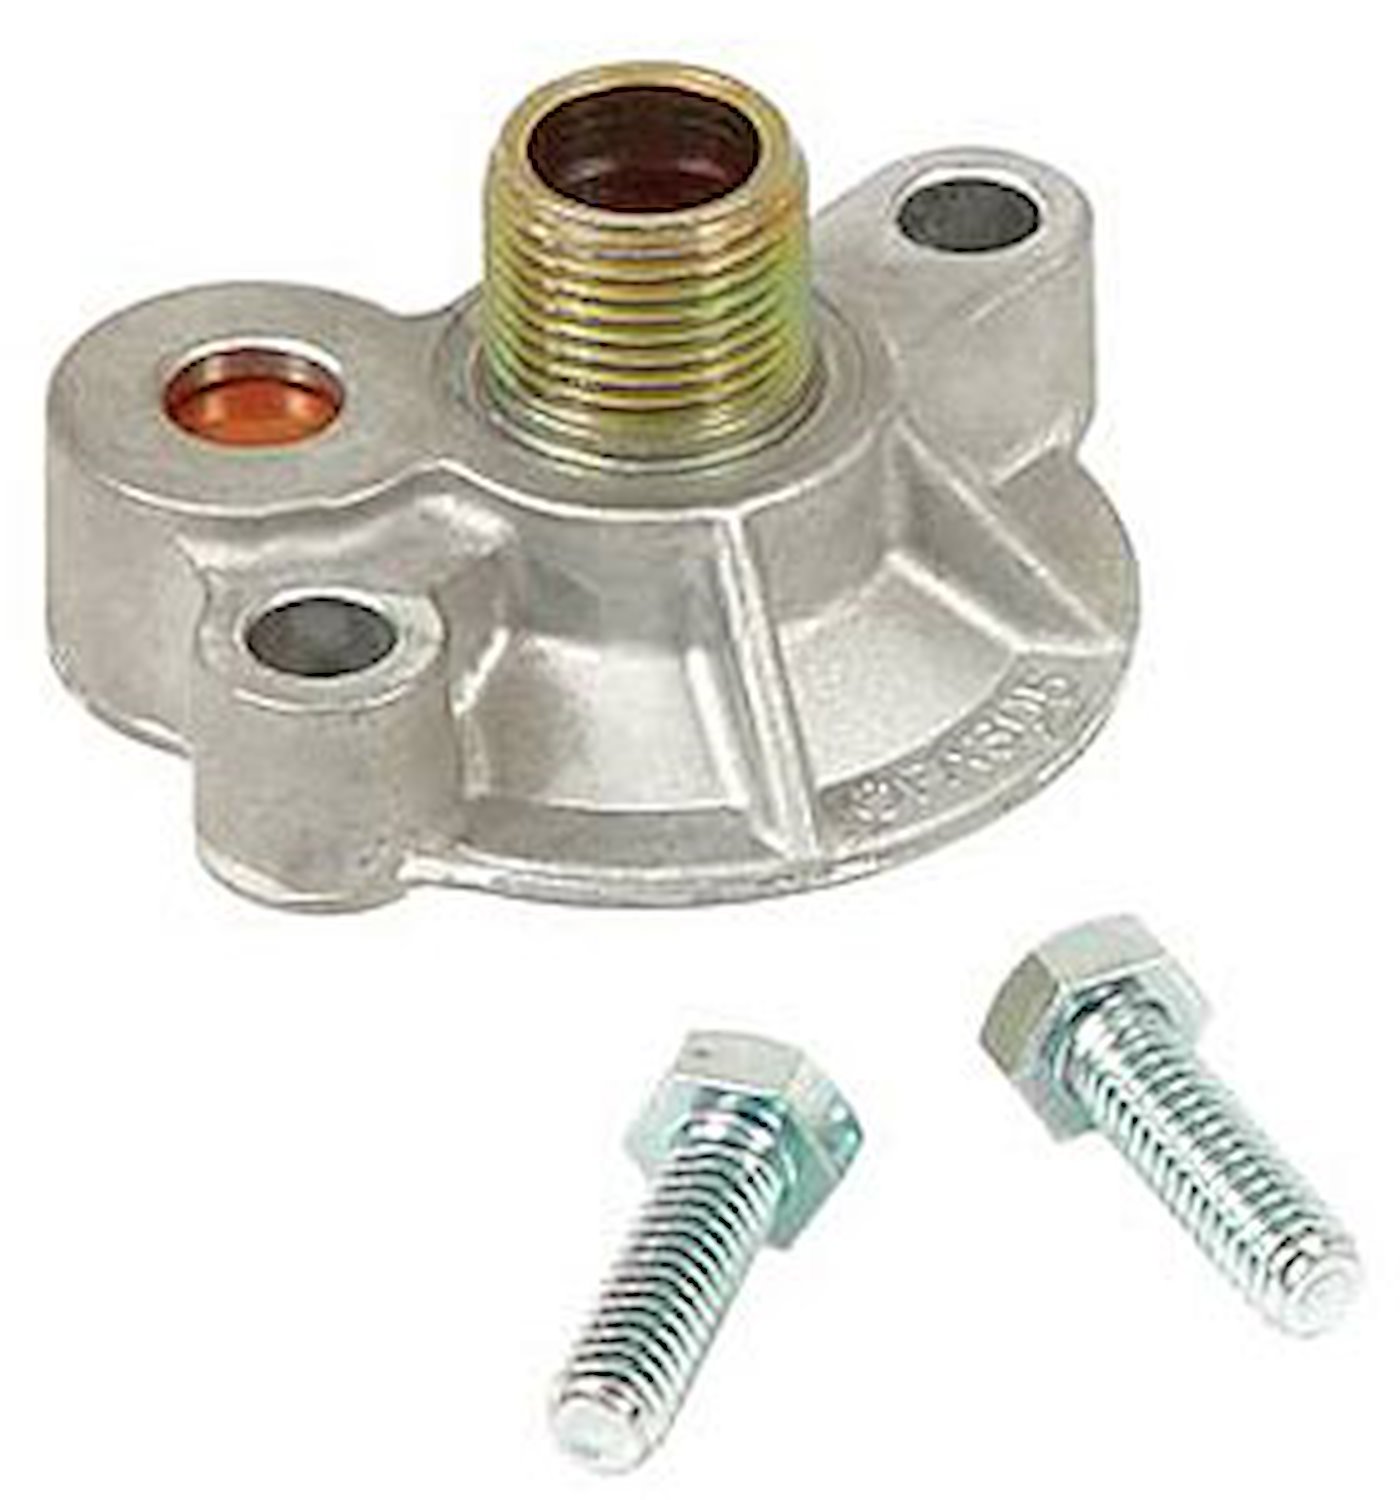 Mr Gasket 1272: Oil Filter Bypass Adapter 1968-86 Chevy 307-400 ...